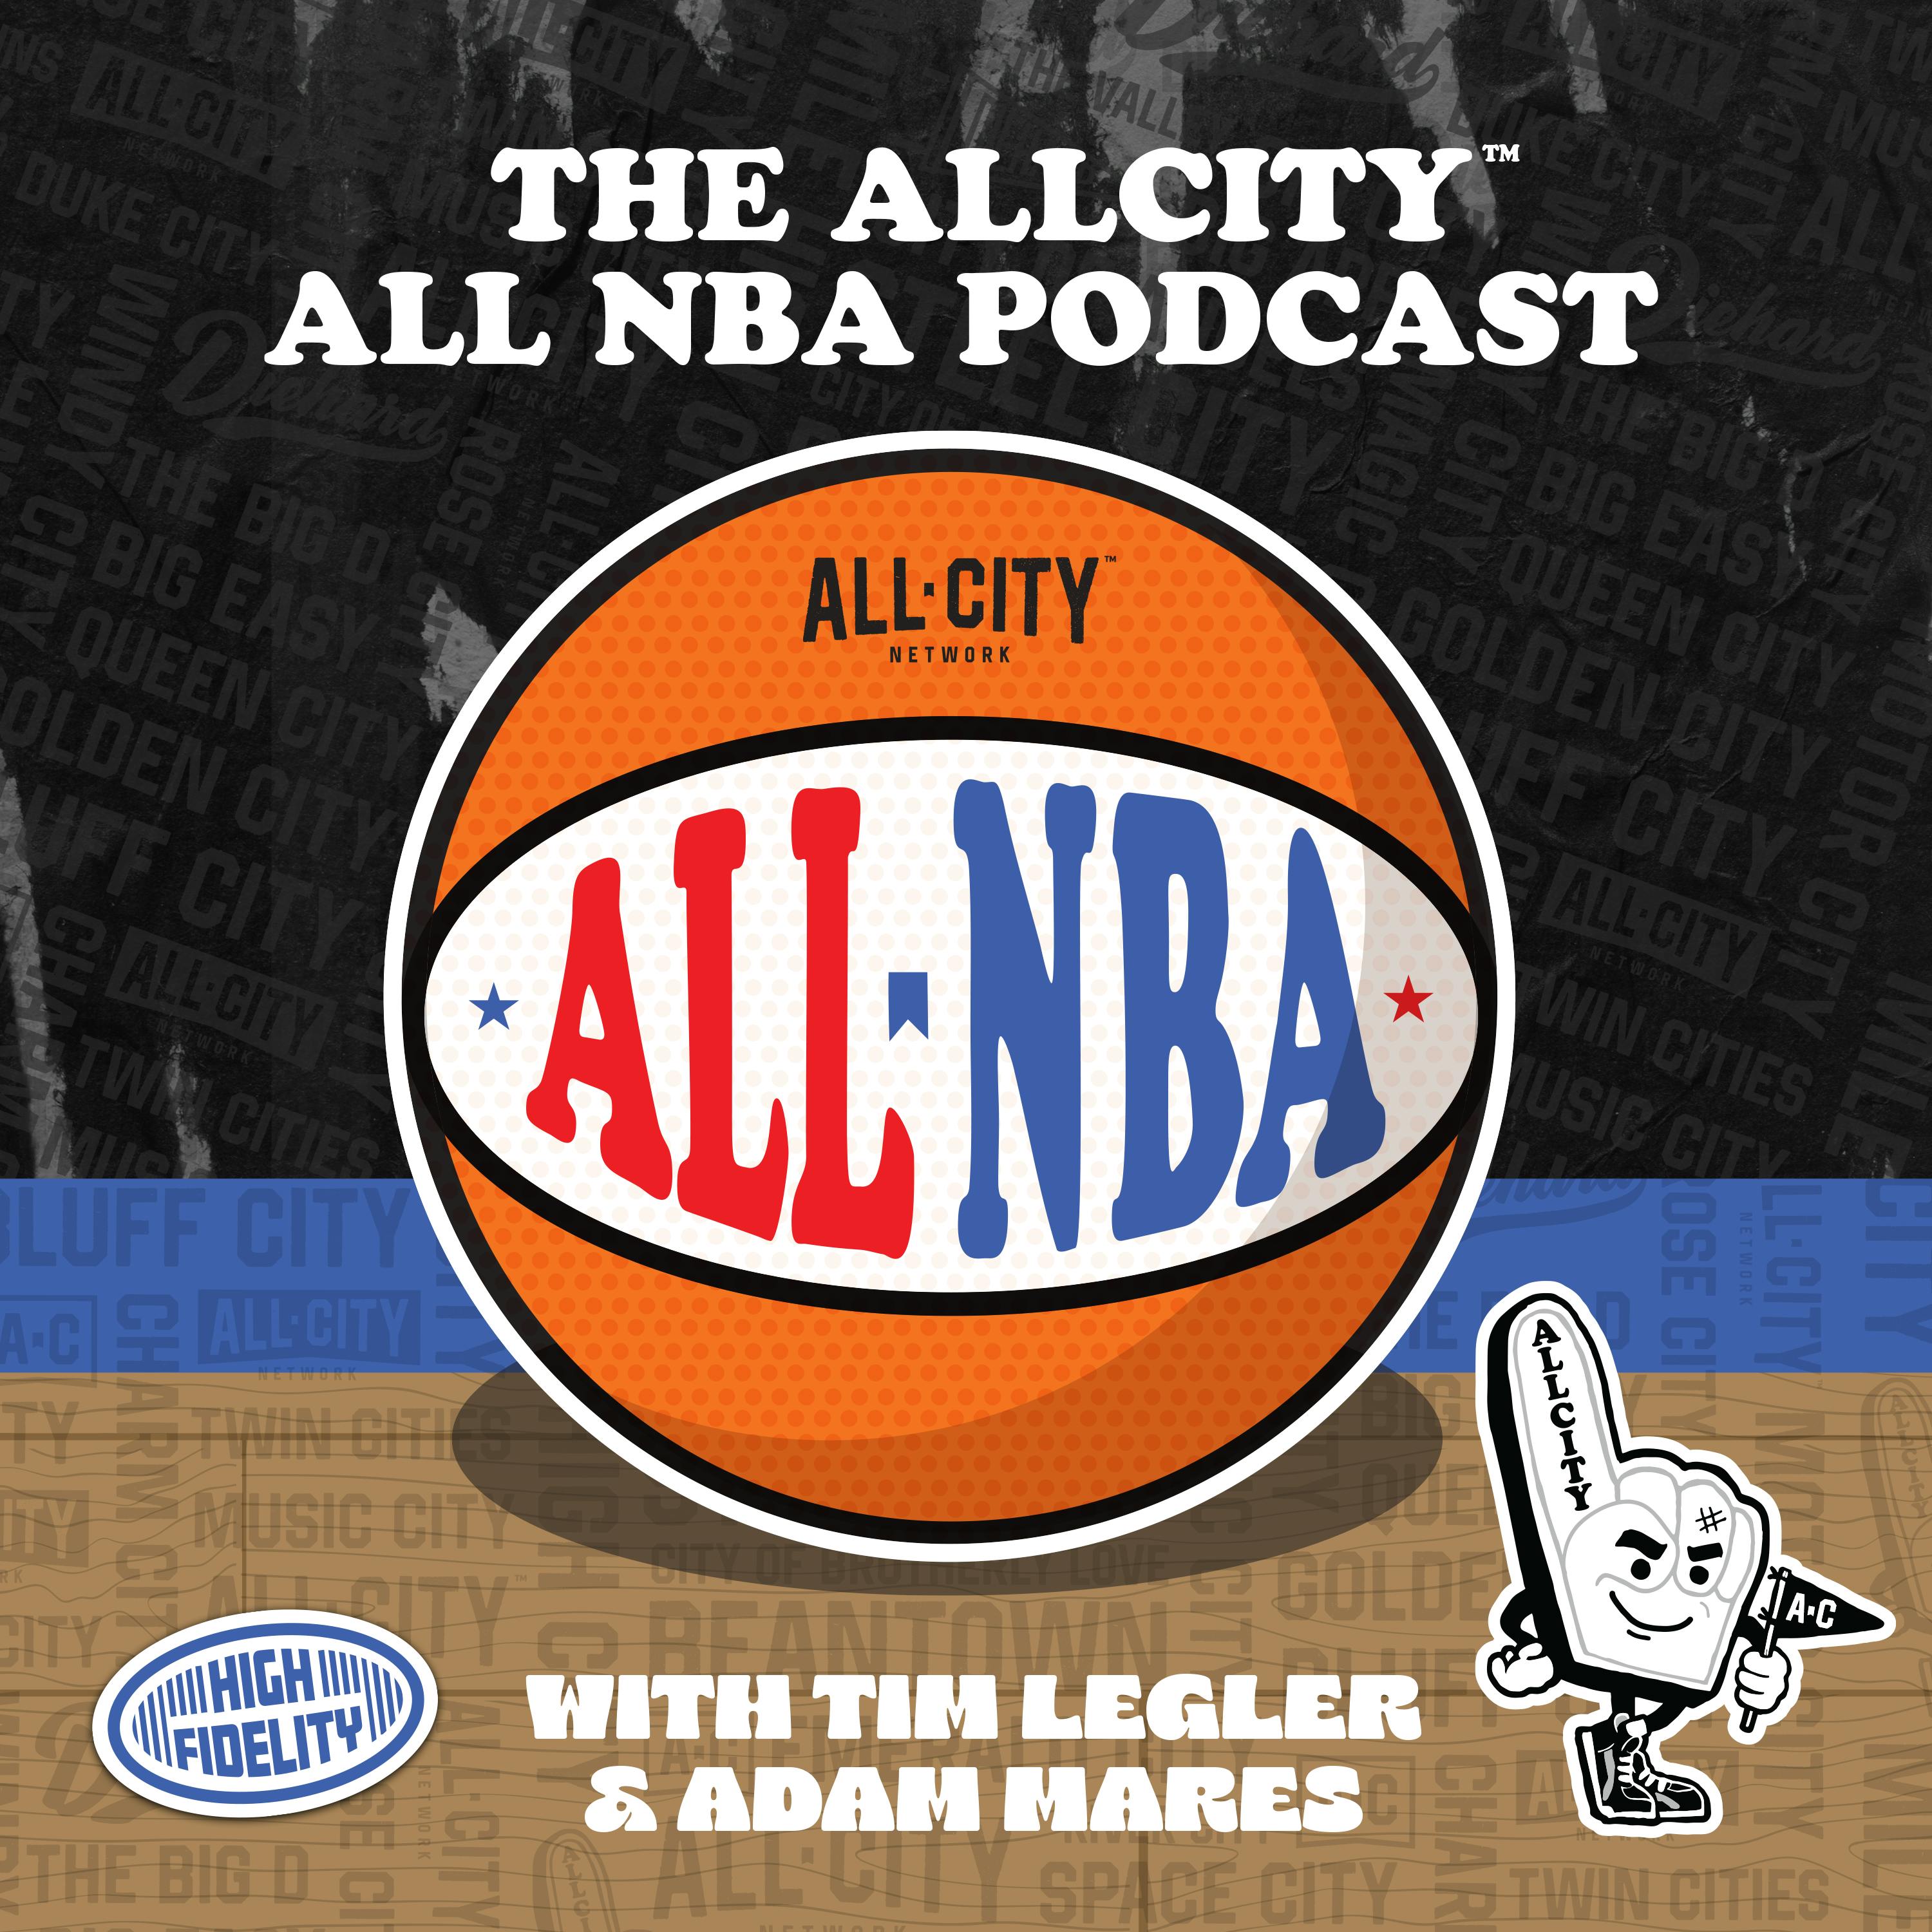 The ALL NBA Podcast: Giannis made a triple-double in the Bucks’ first game after Griffin was fired